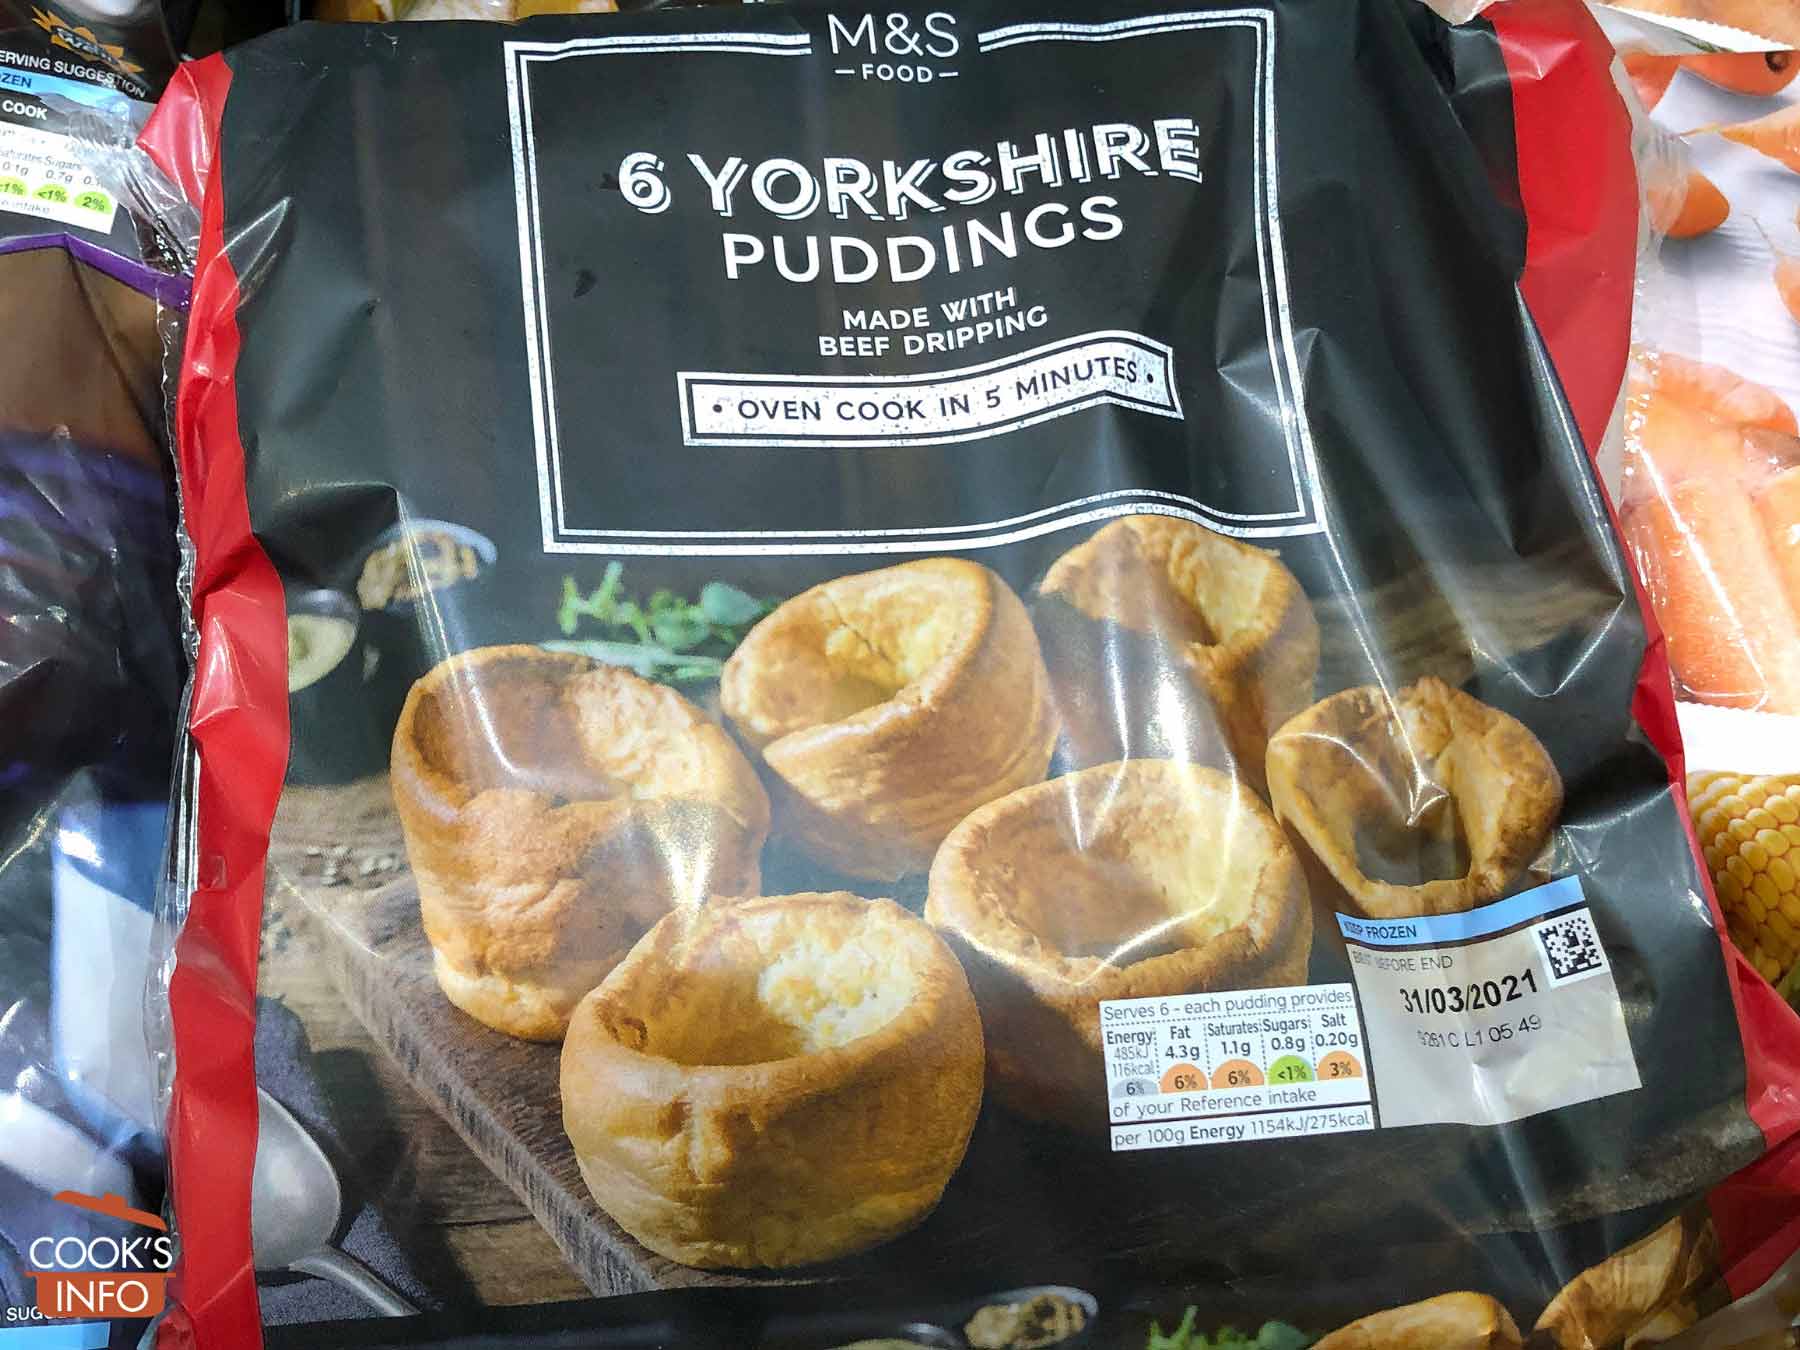 Frozen Yorkshire puddings